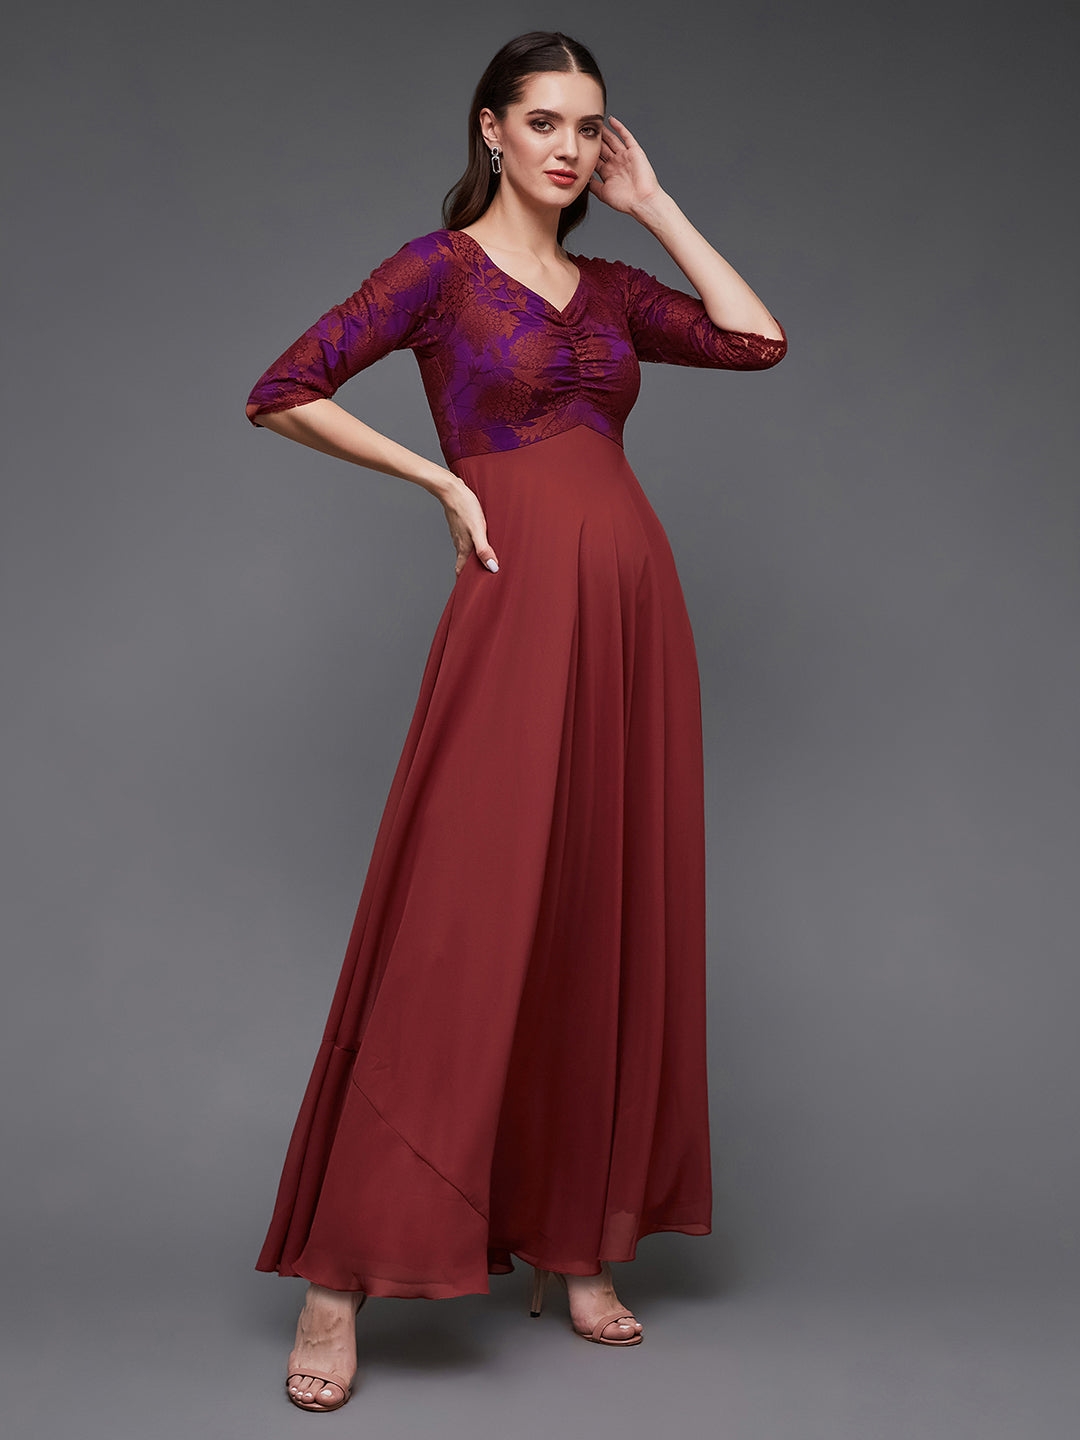 MISS CHASE | Brick Red Sweet heart neck 3/4 Sleeve Self Design Fit & Flare Maxi Dress